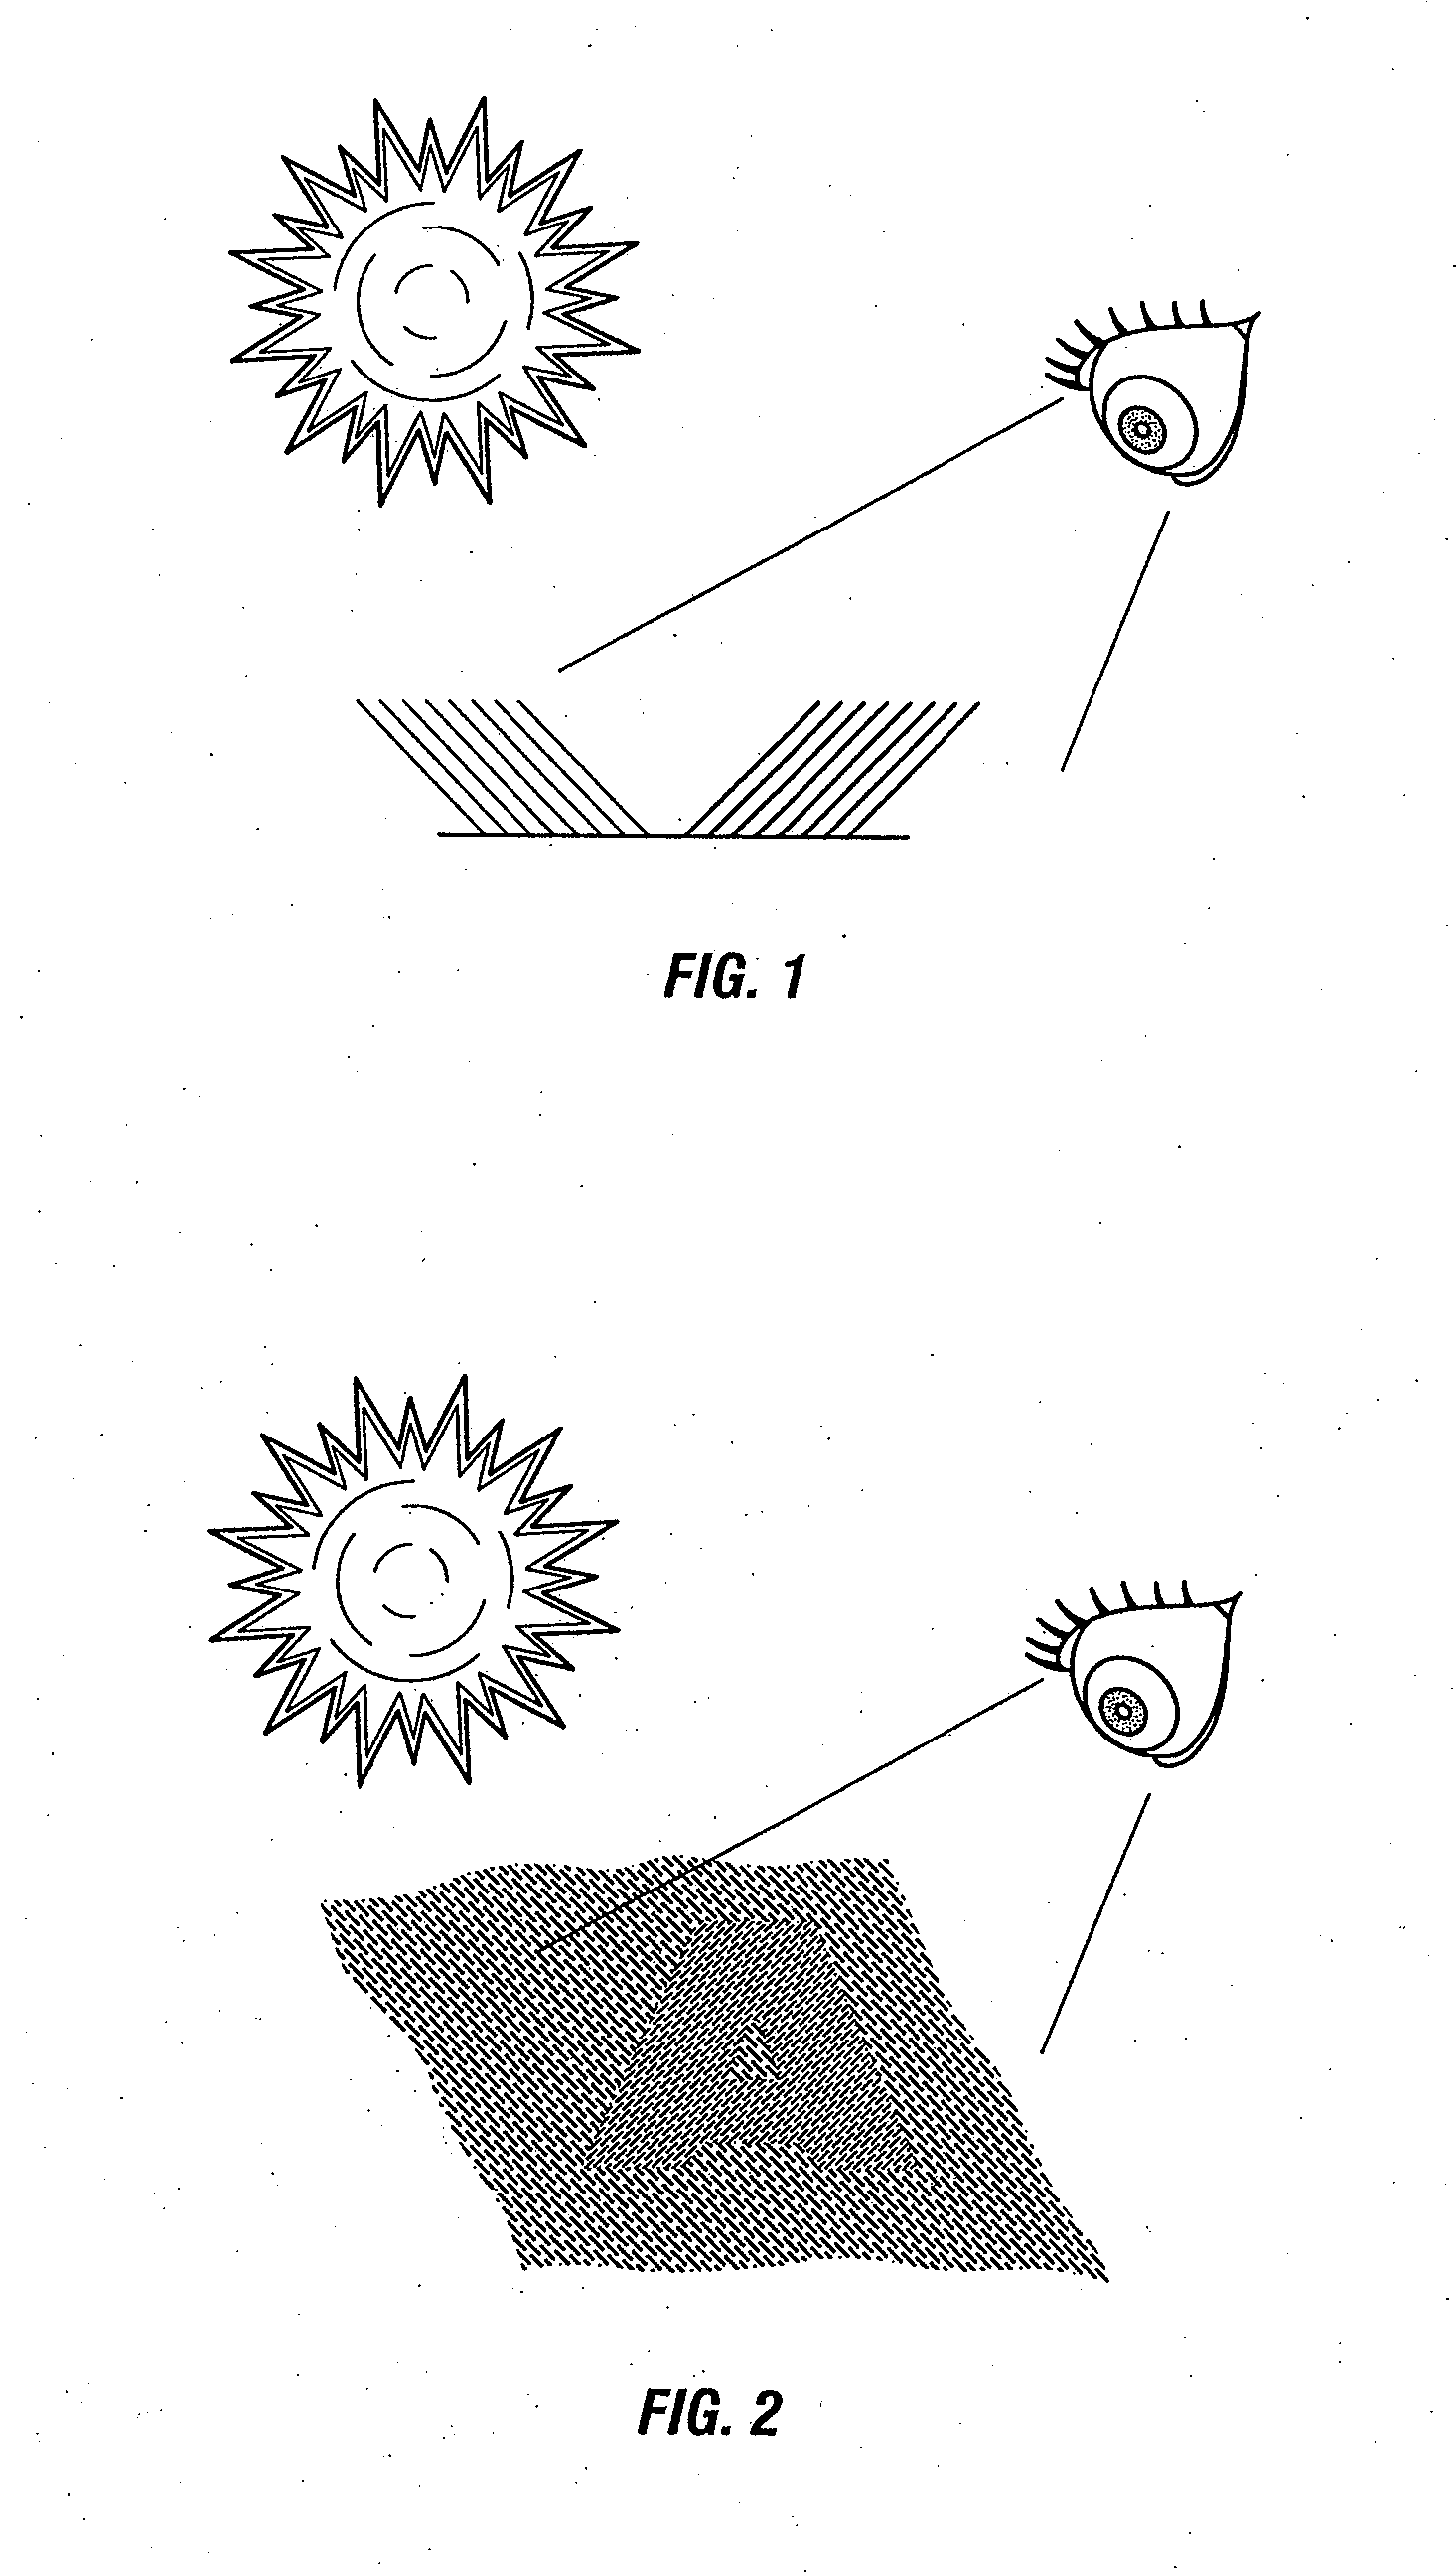 Method and Apparatus for Creating Visual Effects on Grass